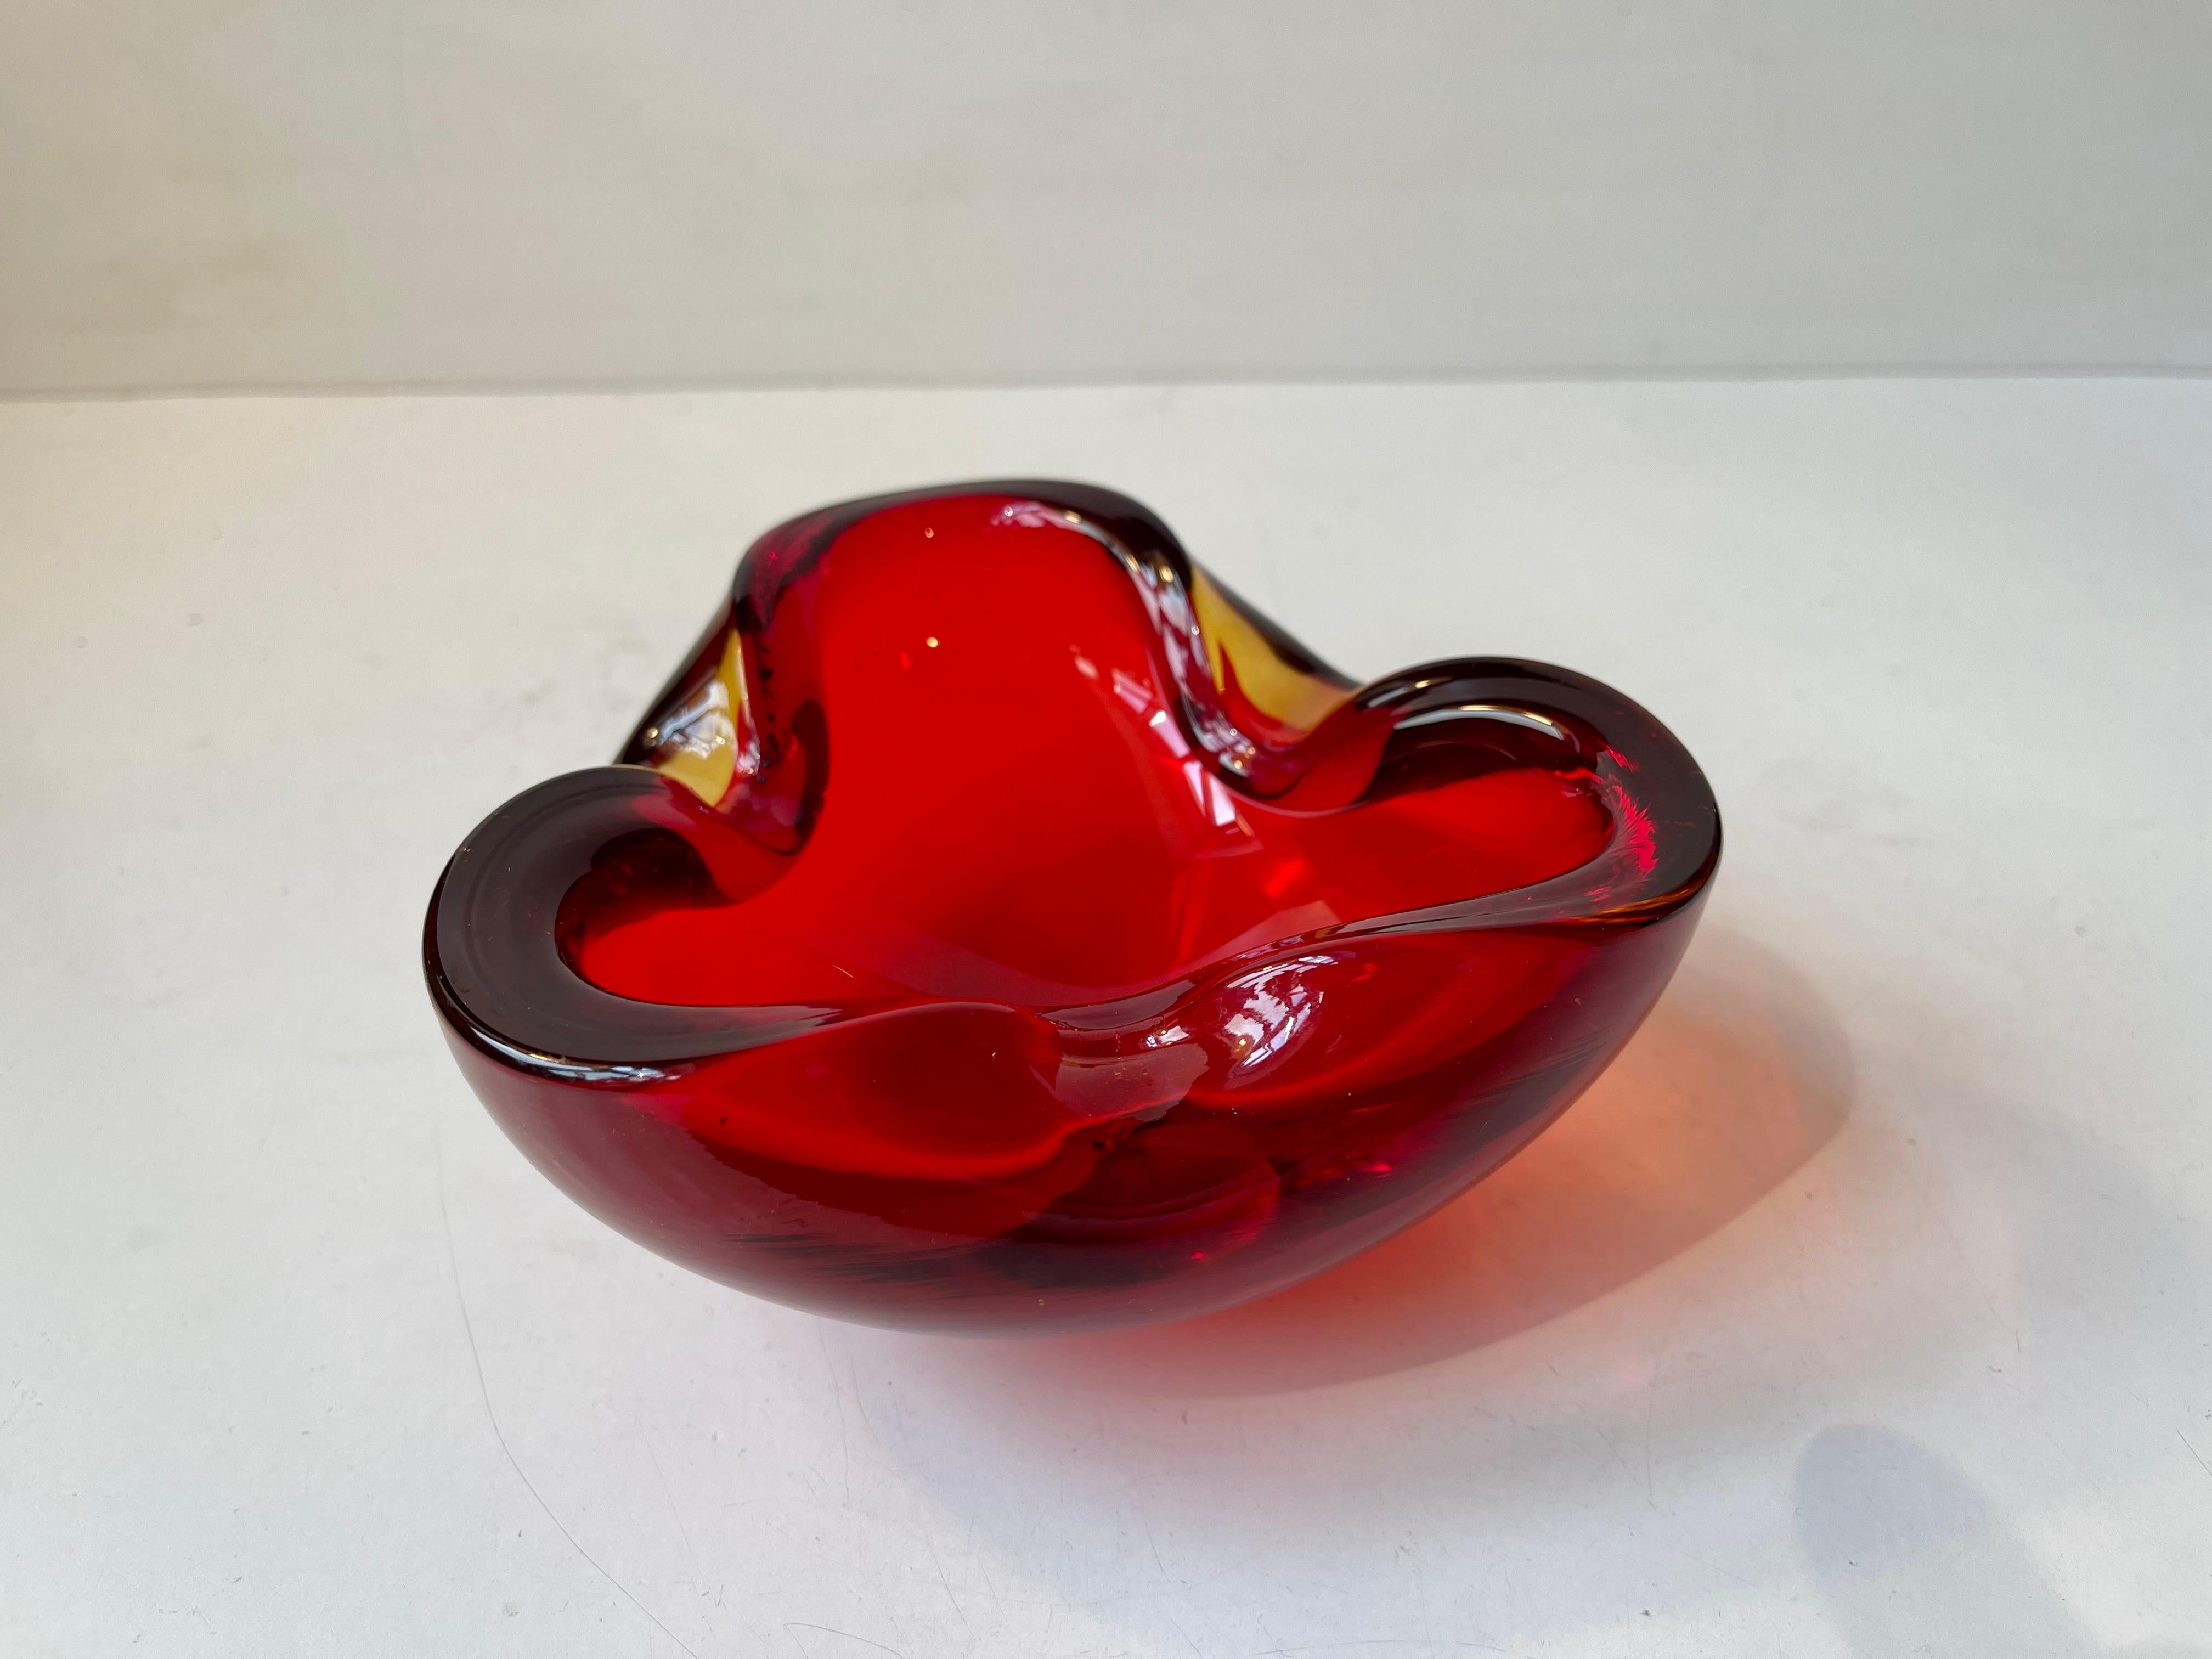 Decorative sommerso ashtray that resembles 'Red Lips' by Fratelli Toso Murano, circa 1970.
Measurements: H: 7 cm, W: 14.5 cm, Dept: 14 cm